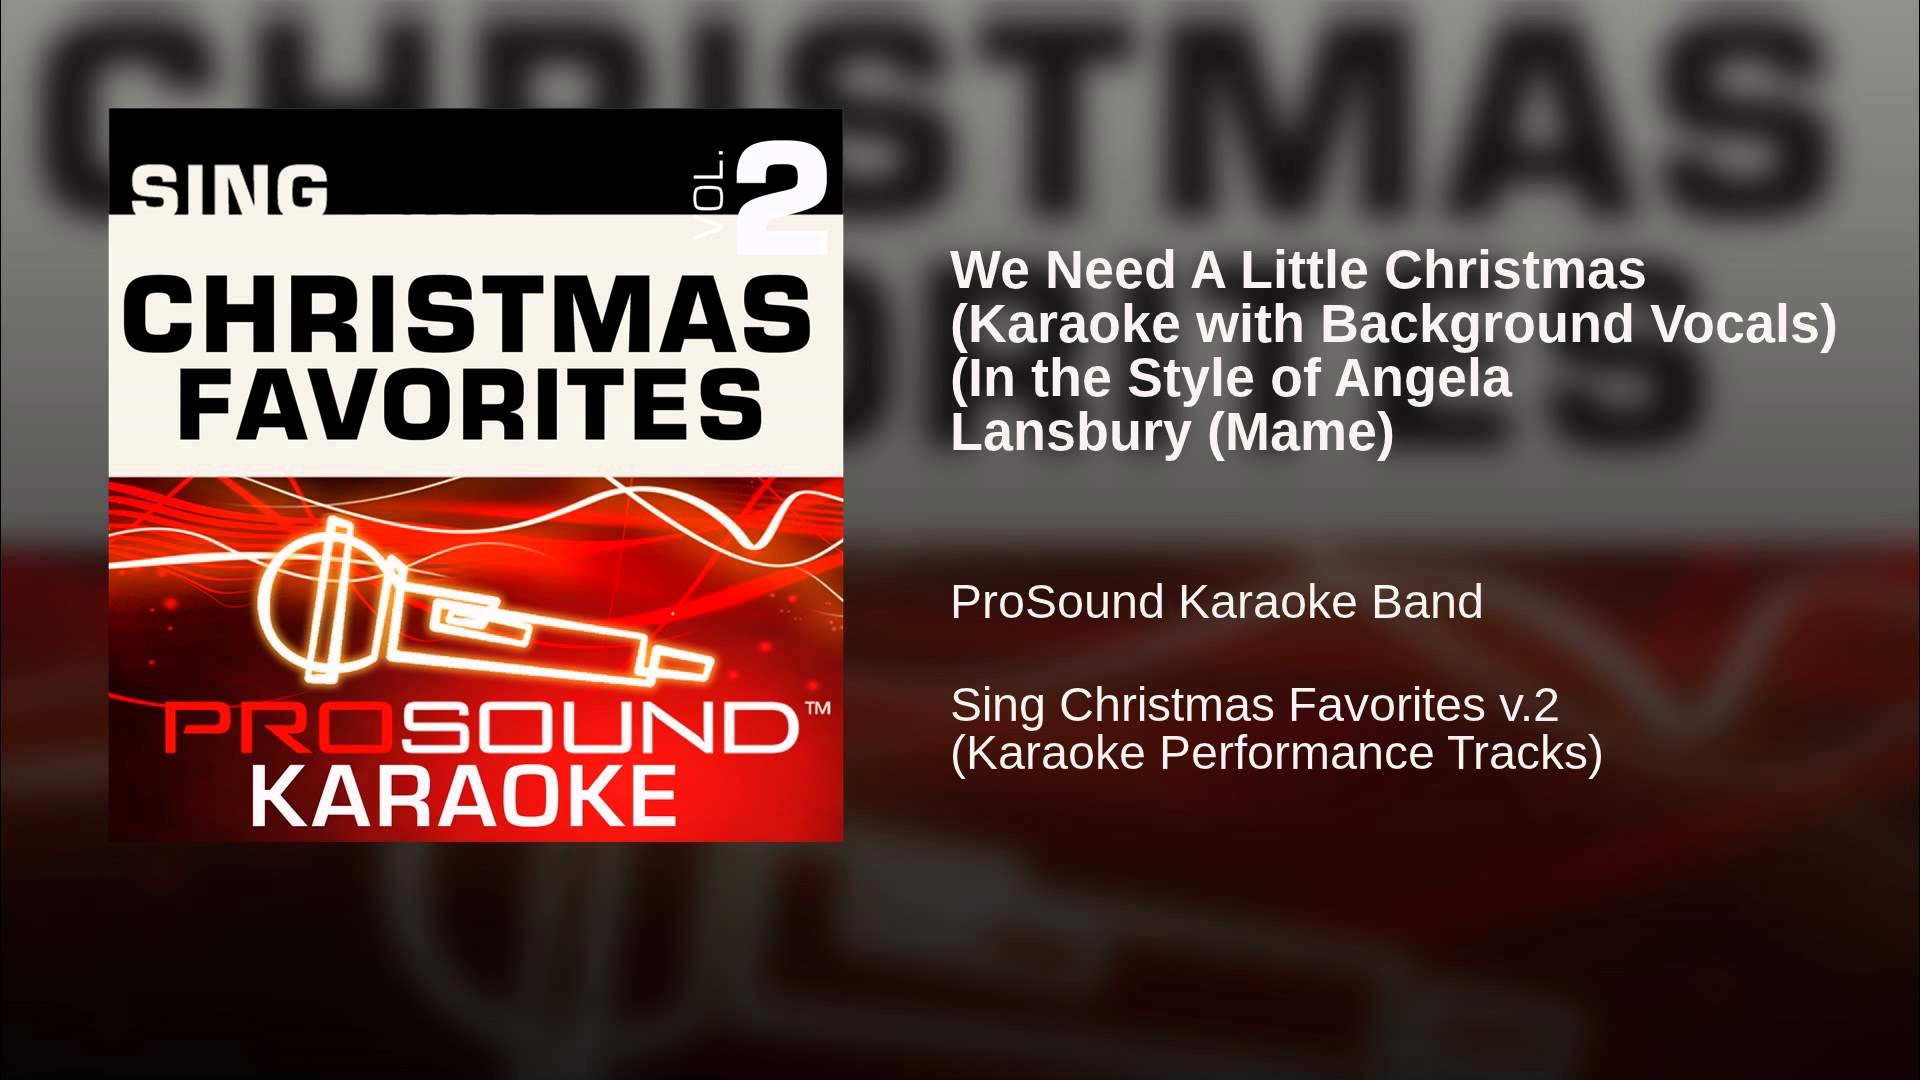 We Need A Little Christmas Karaoke with Background Vocals In the Style of Angela Lansbury Mame